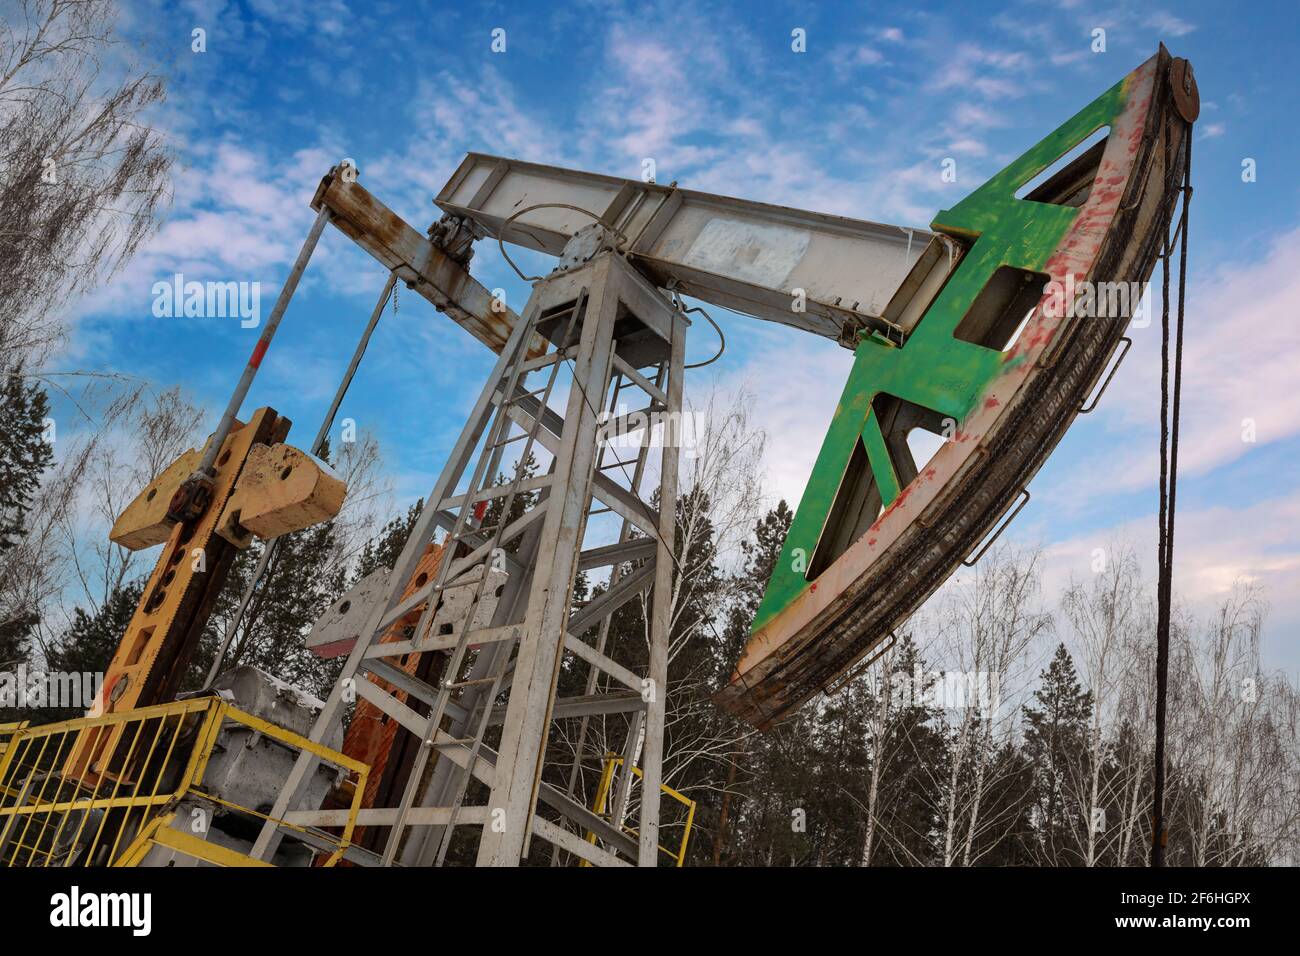 Oil pumpjack winter work is the overground drive for a reciprocating piston pump in an oil well. It is used to mechanically lift liquid out of the wel Stock Photo